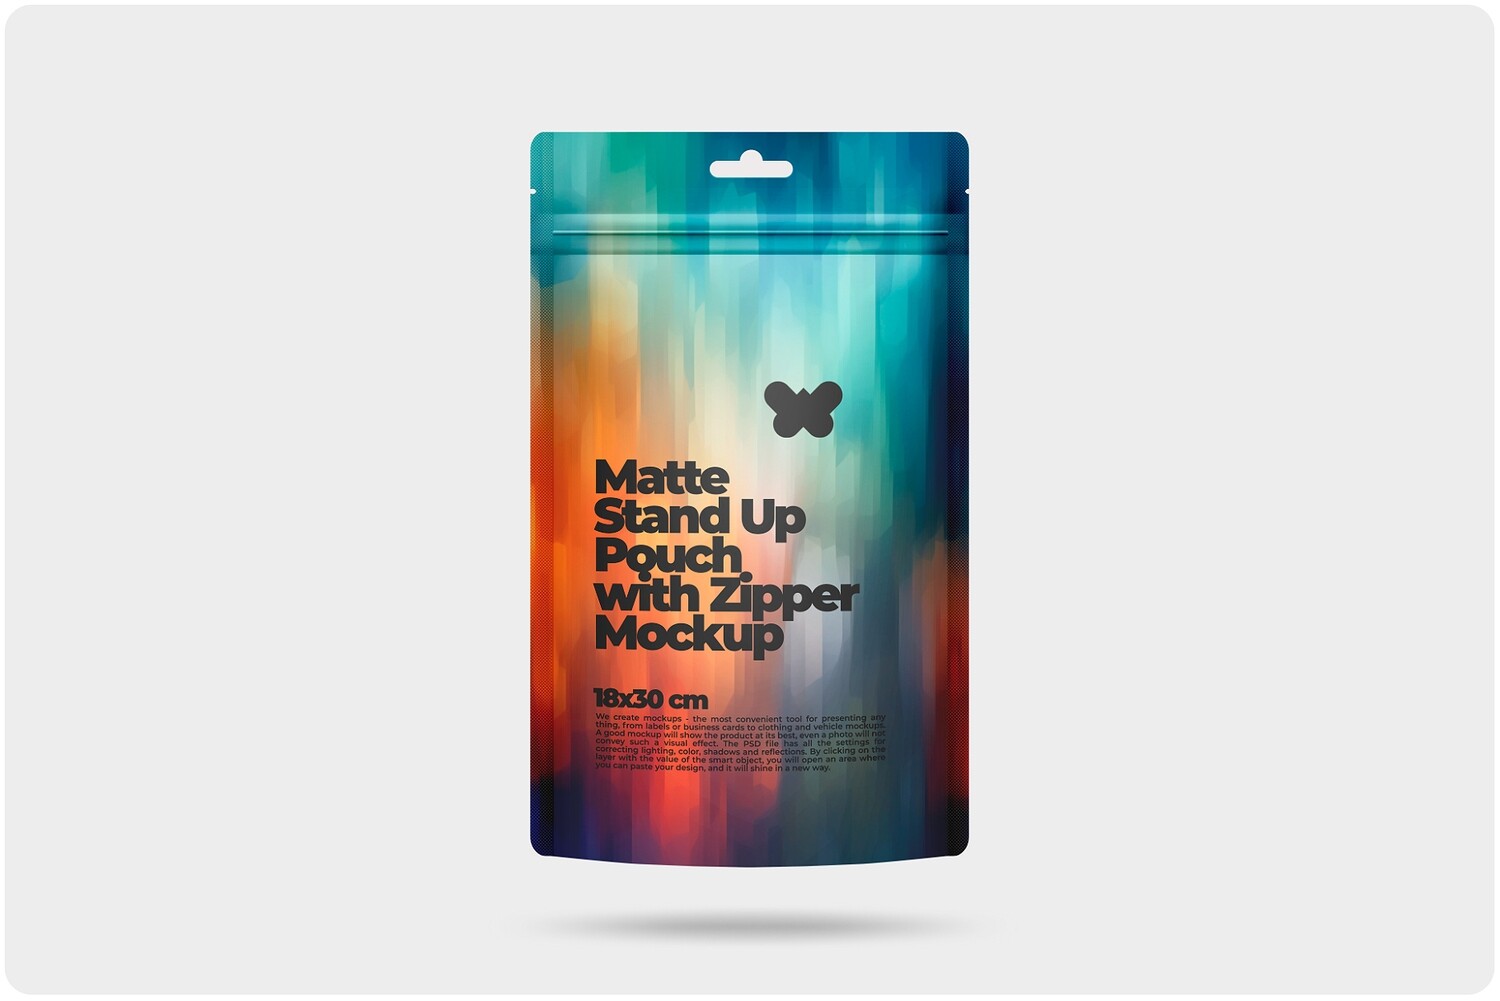 Matte Stand Up Pouch with Zipper Mockup 8x11,7in (18x30cm)